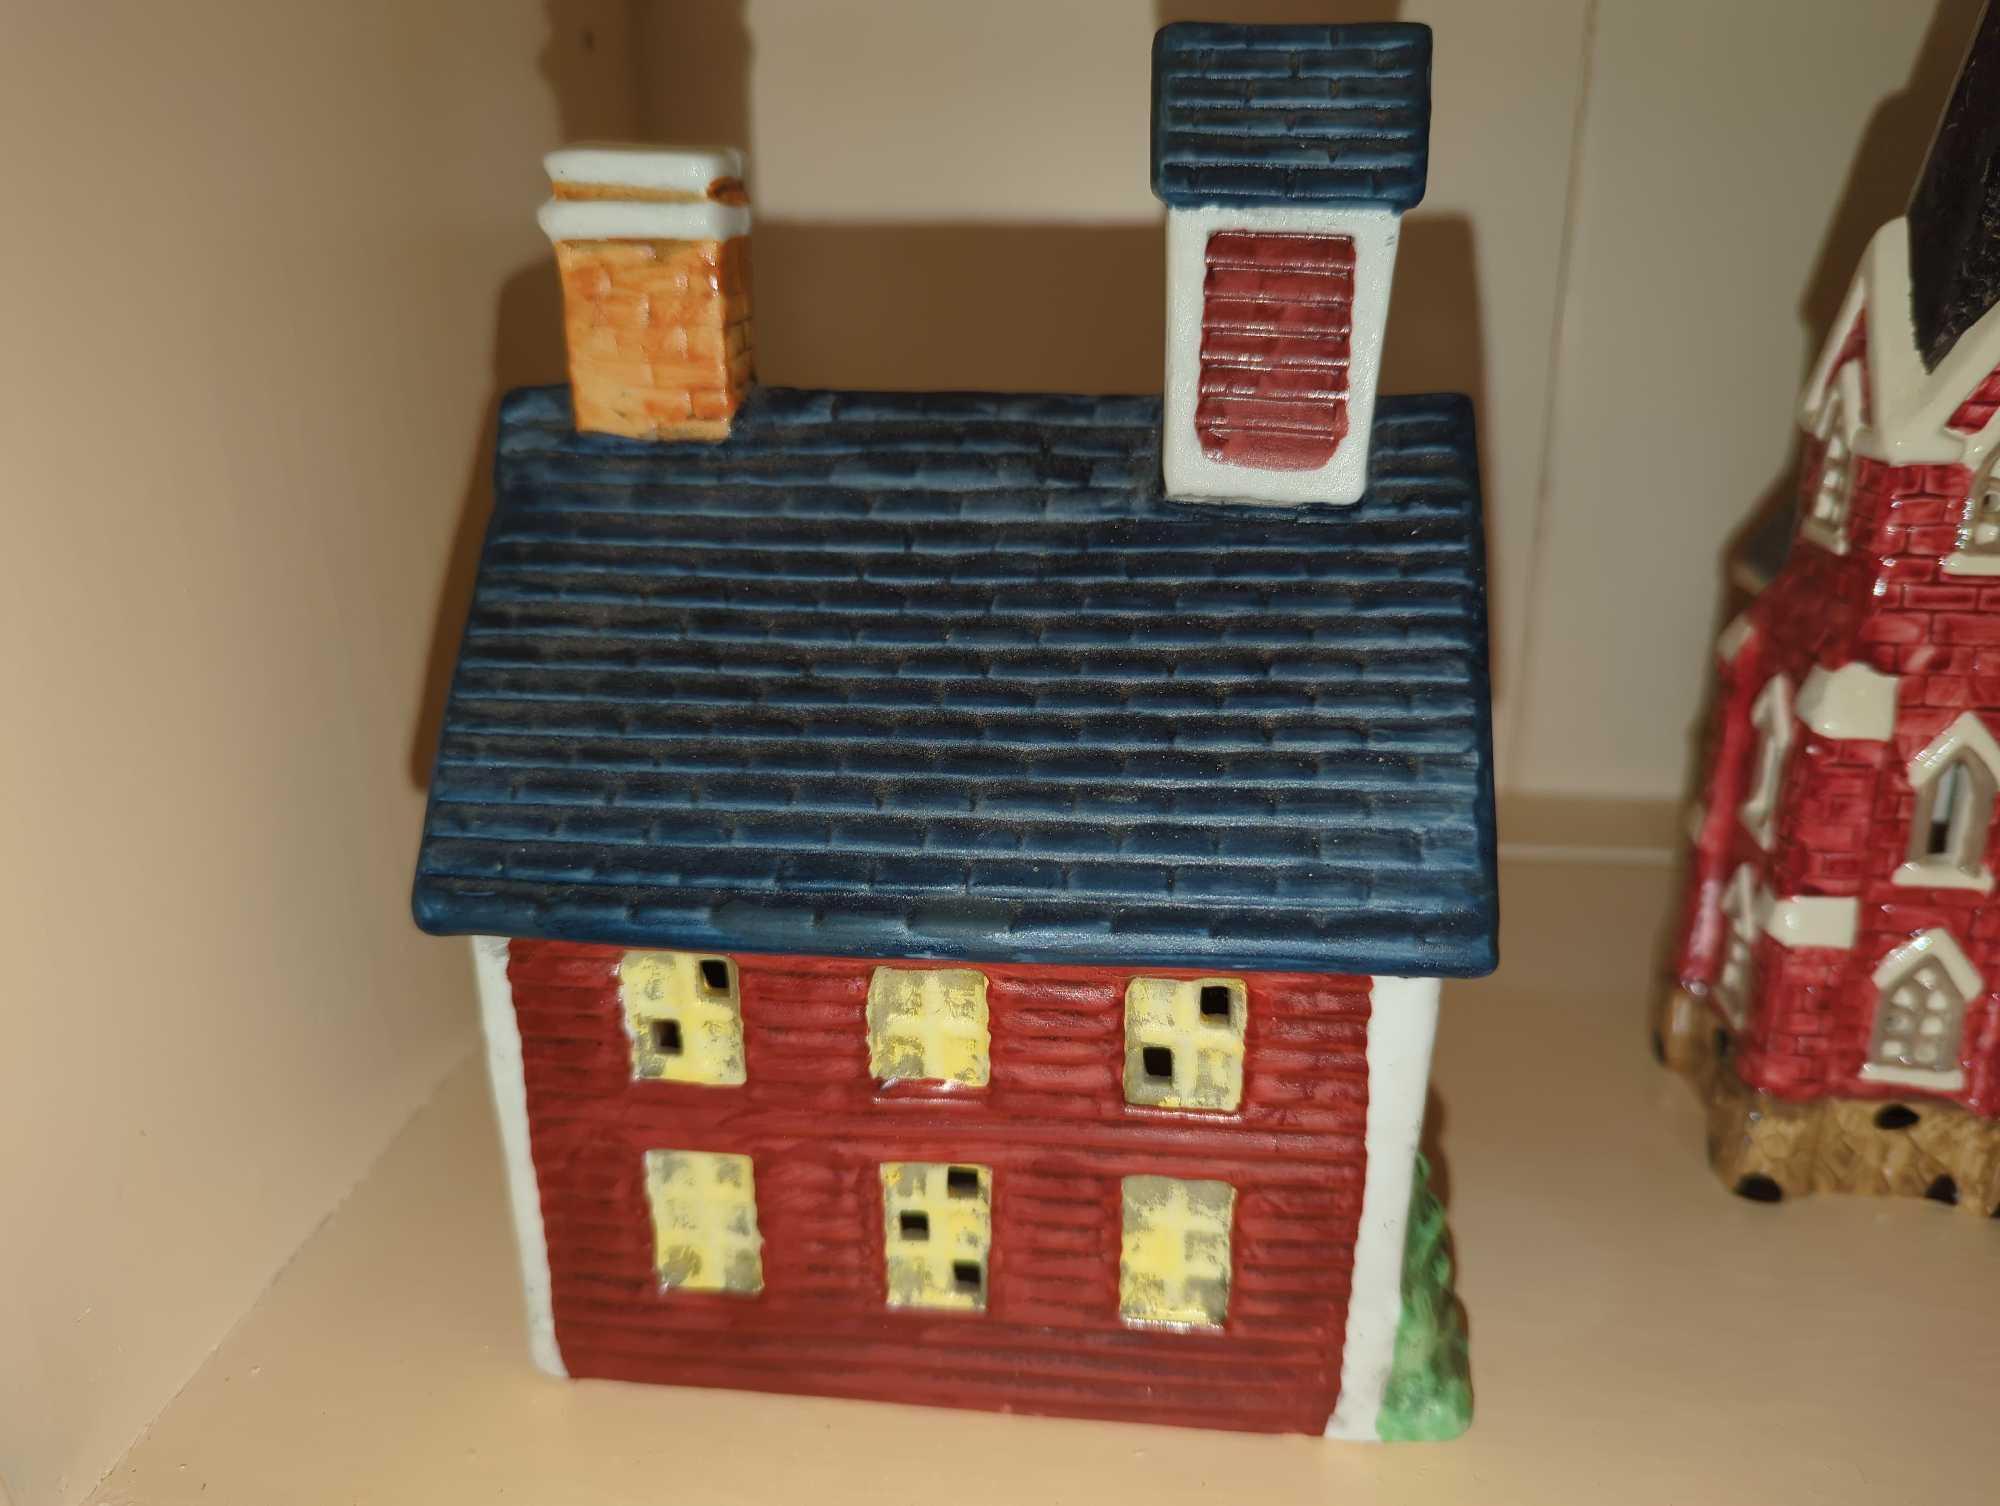 (No Light) Vintage 1991 Americana Porcelain Light Up School House Collectible, Out of the Box Retail